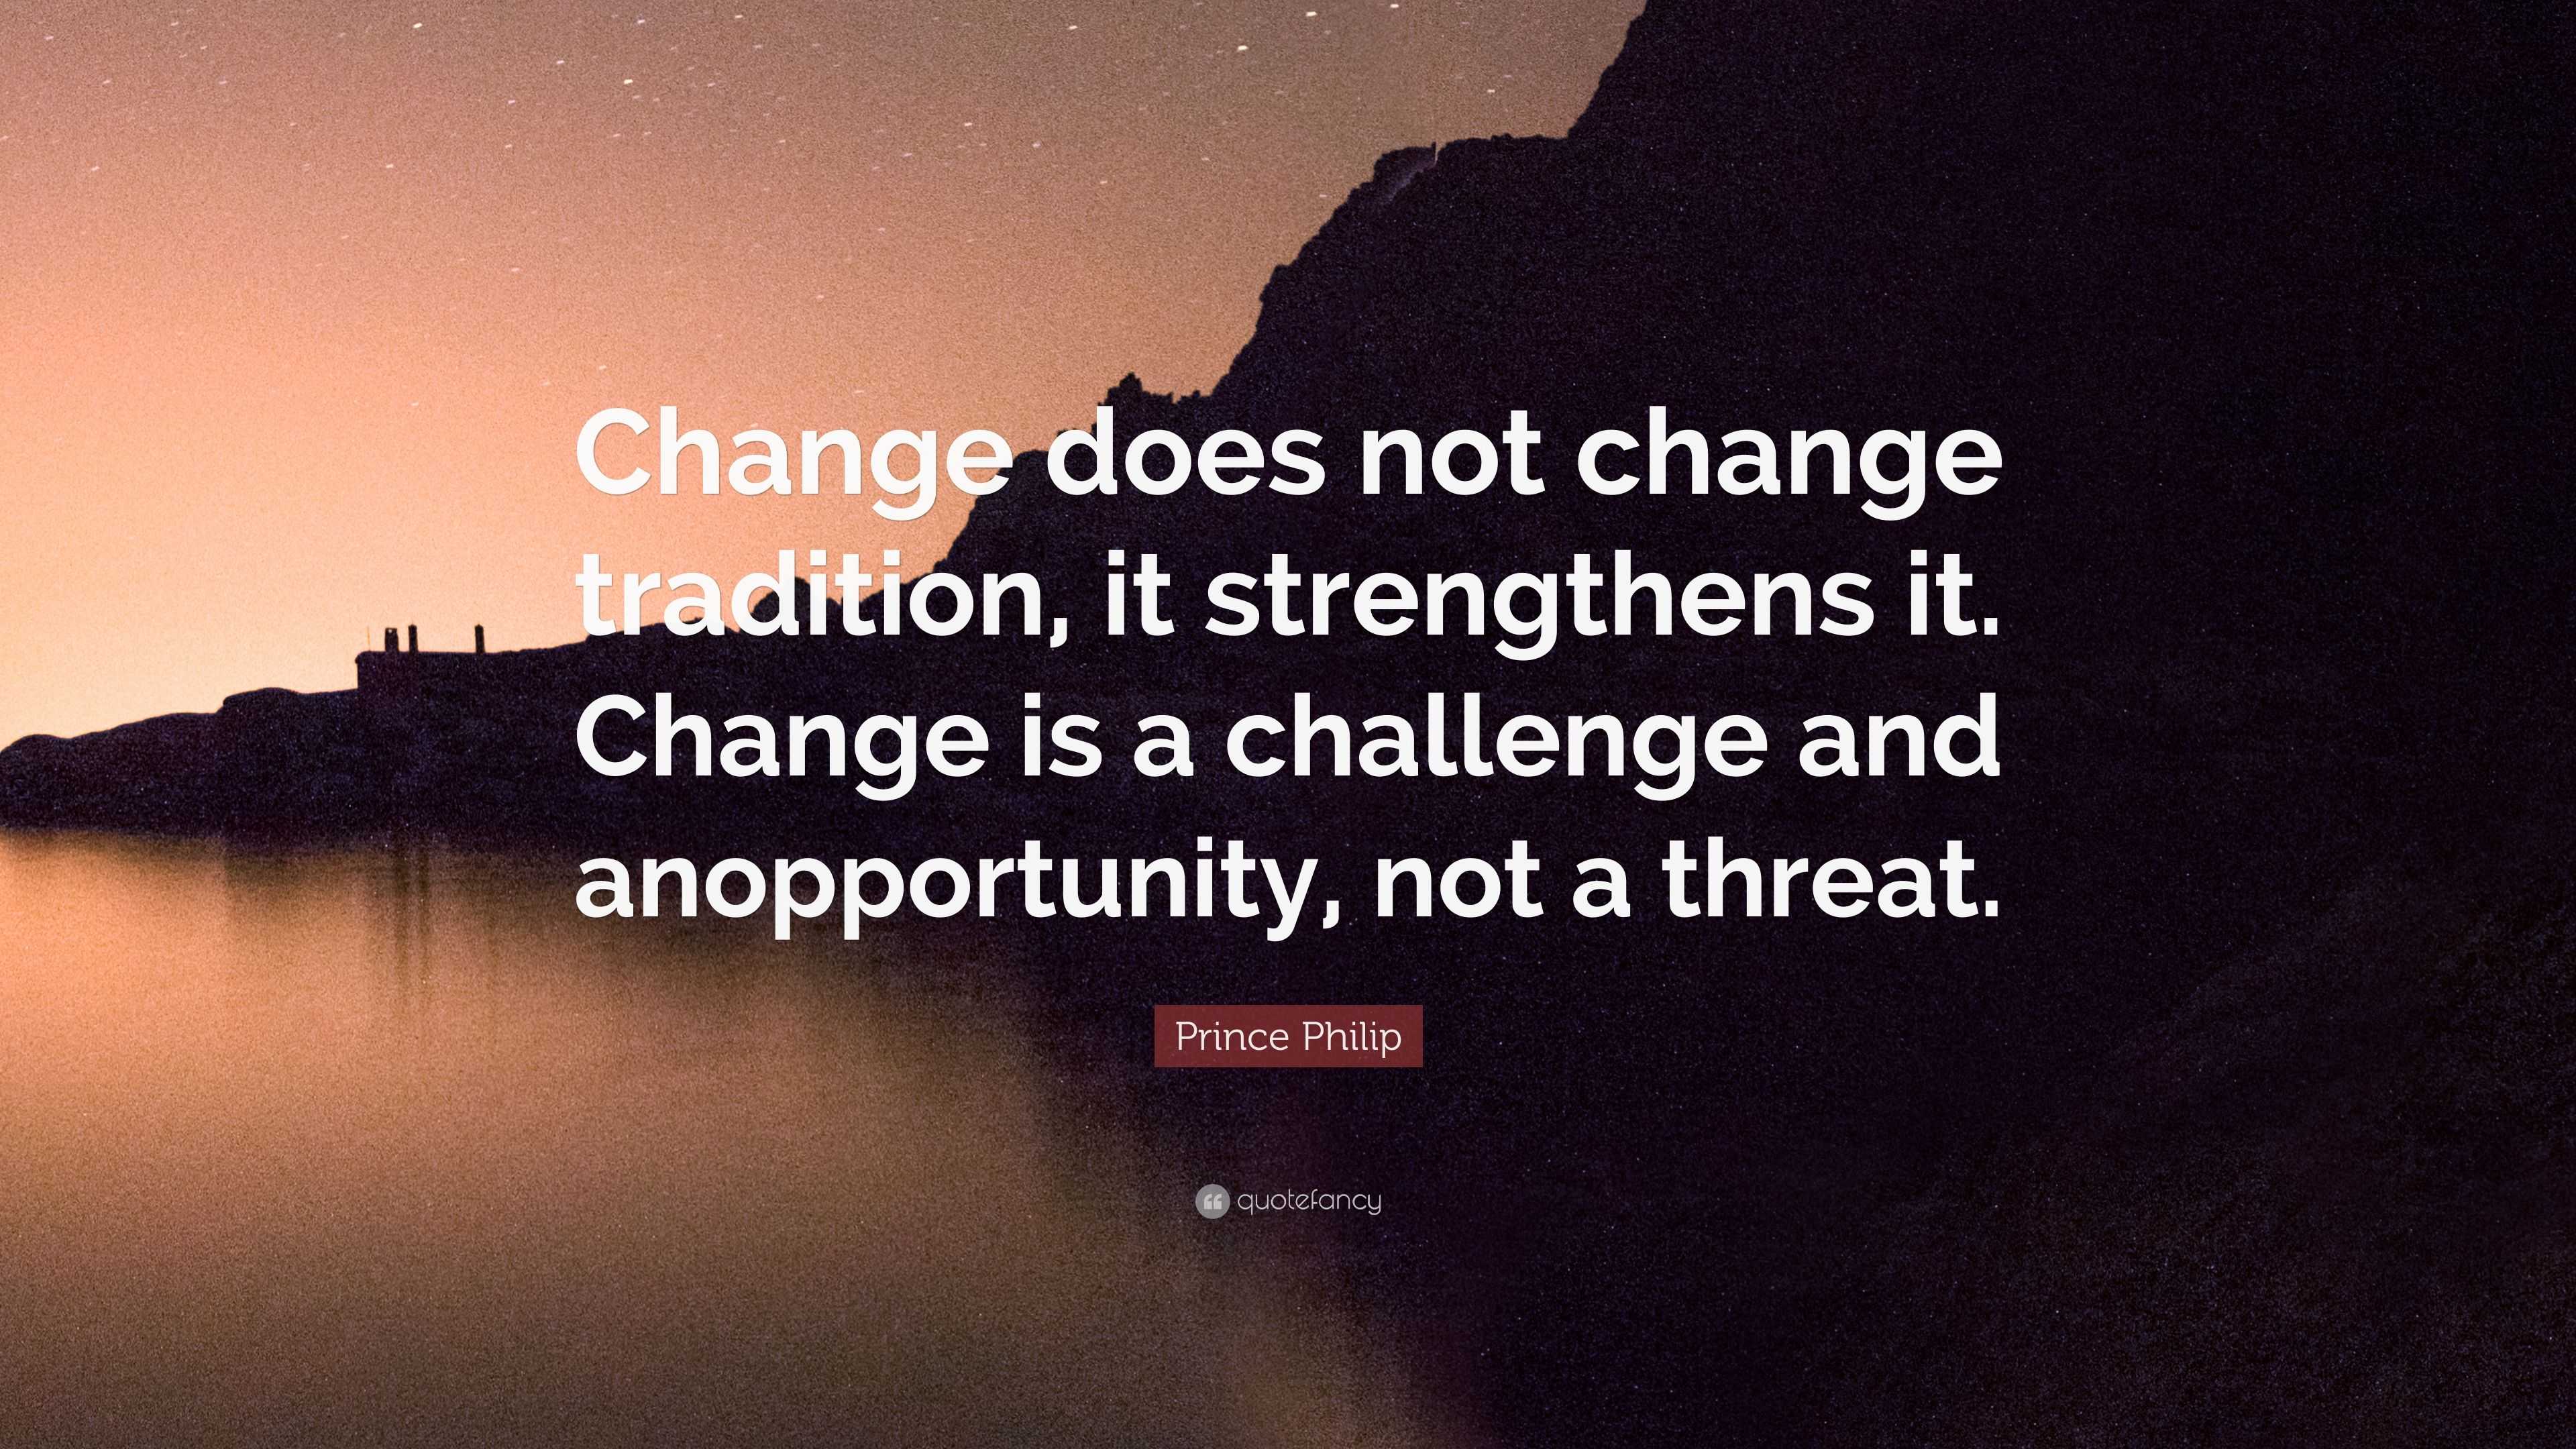 Prince Philip Quote: “Change does not change tradition, it strengthens ...